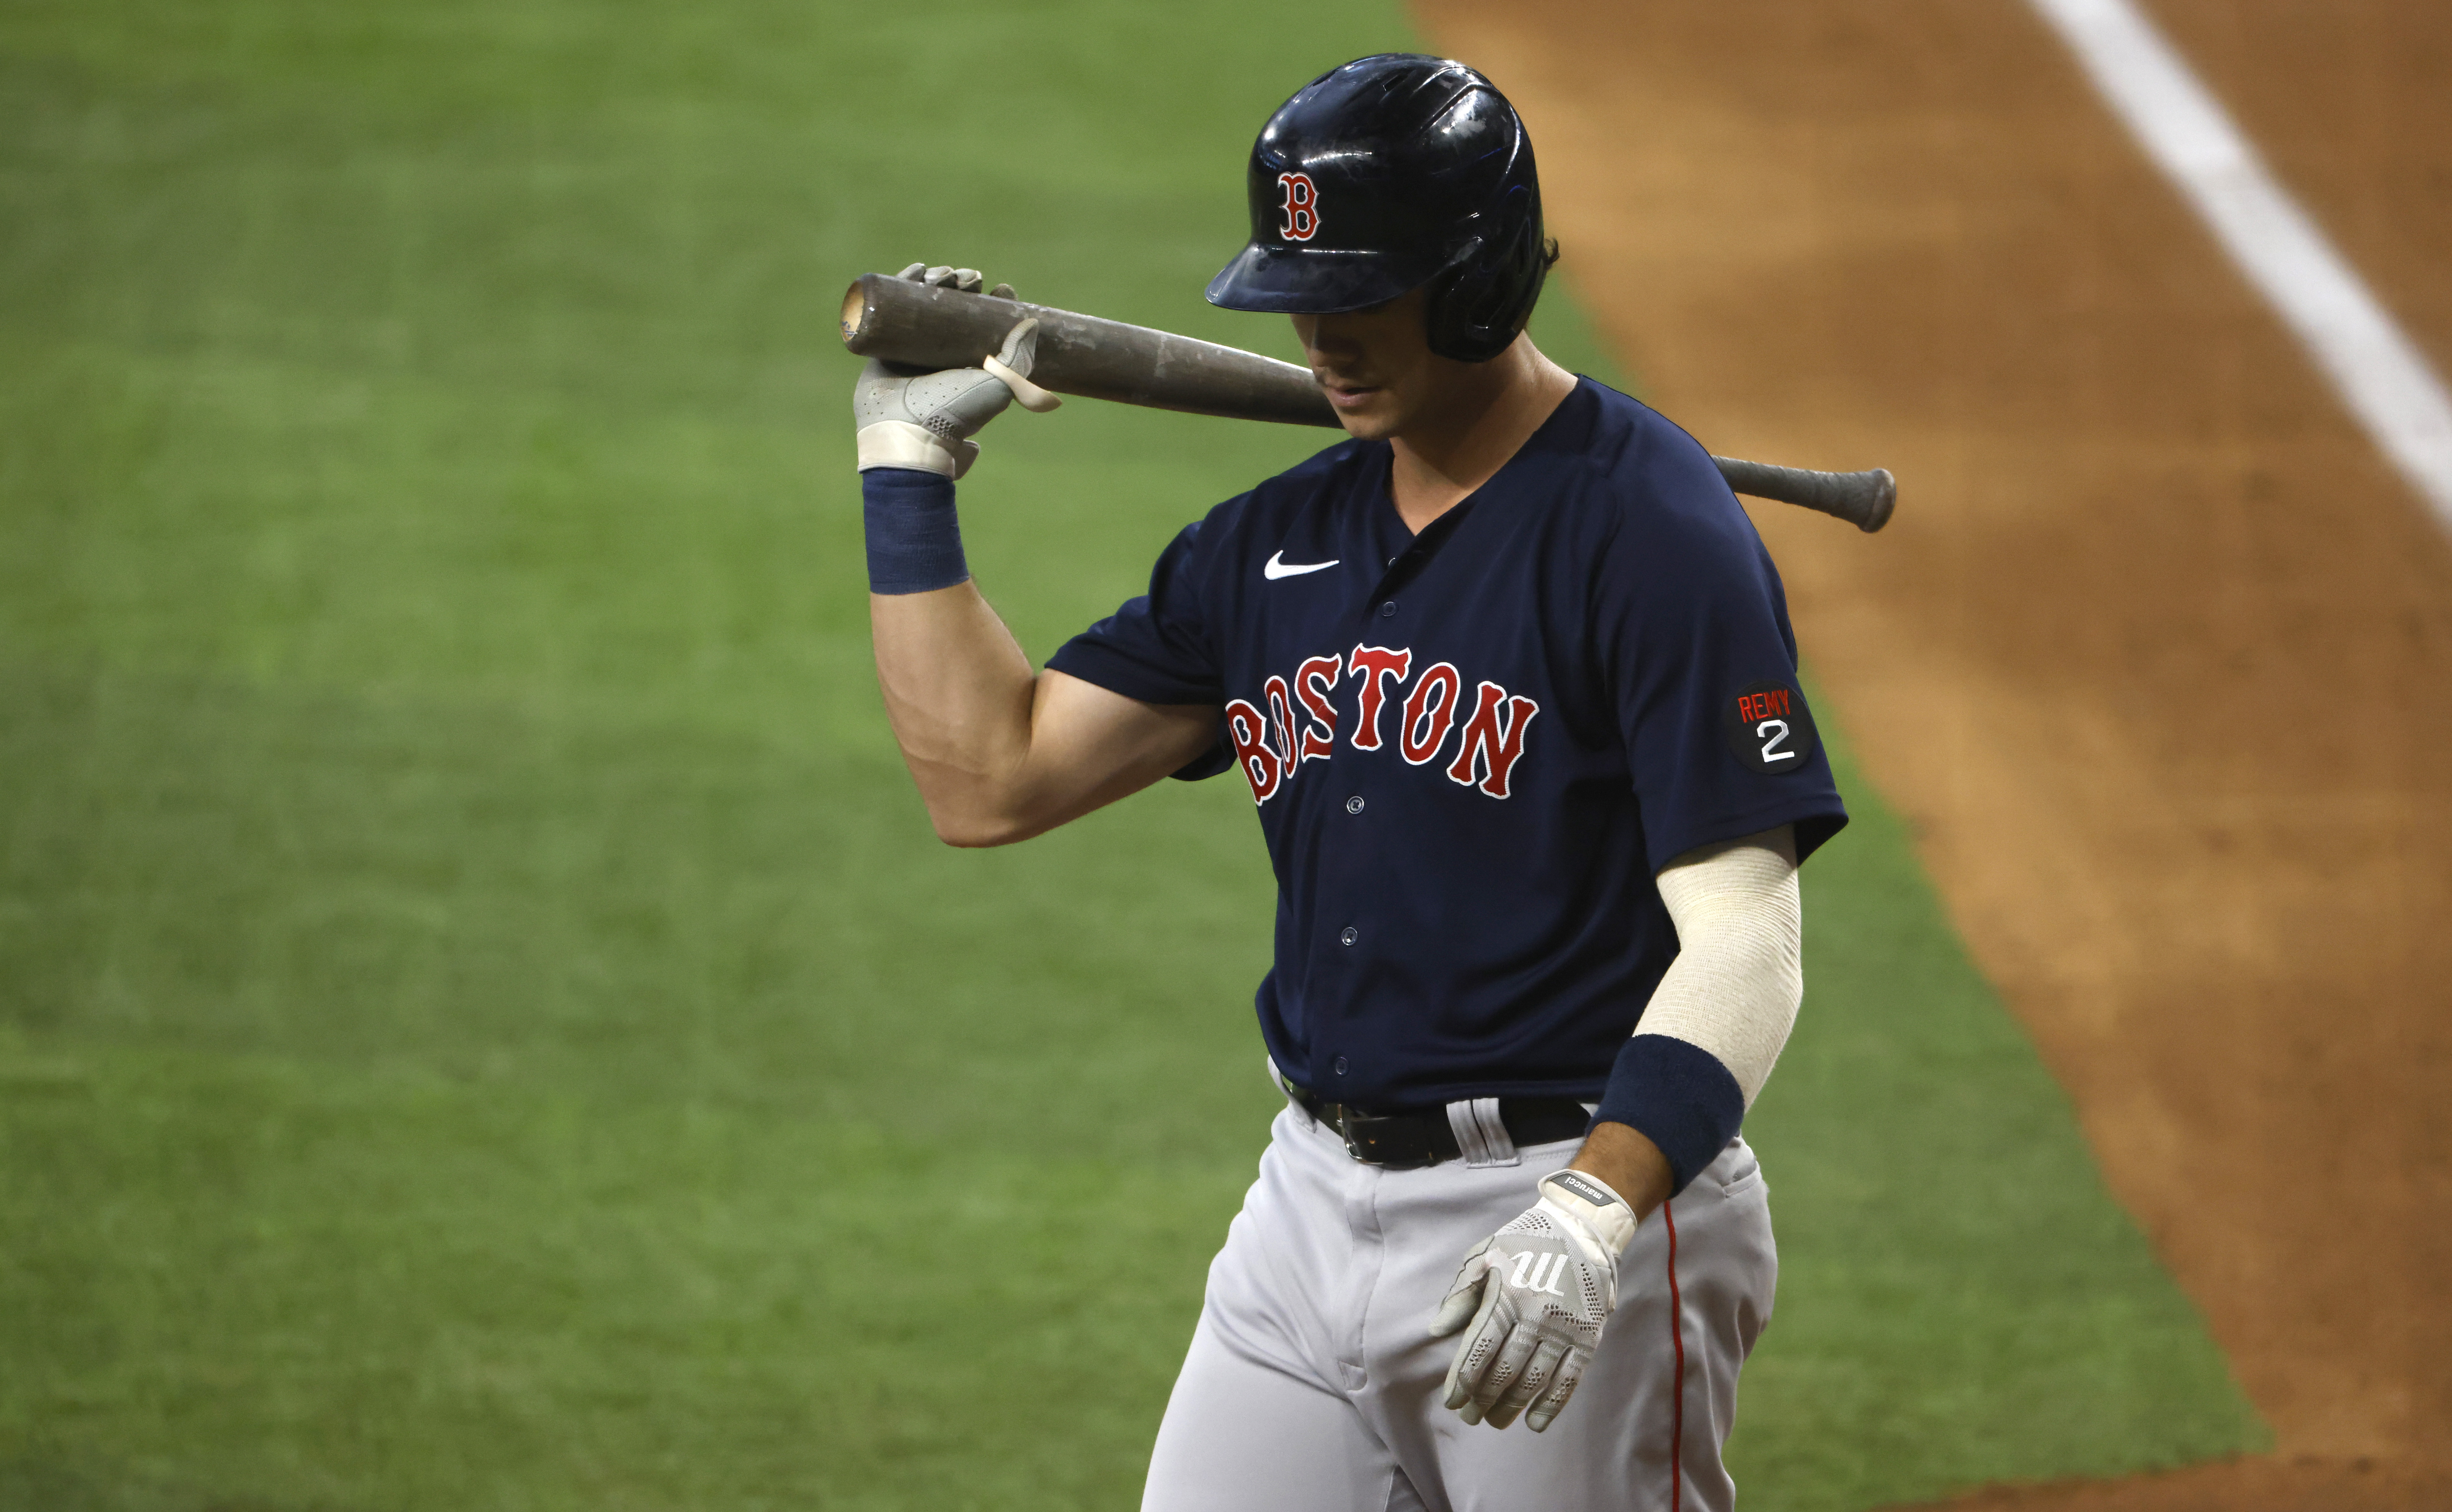 Red Sox contingent in the middle of American League's All-Star victory -  The Boston Globe